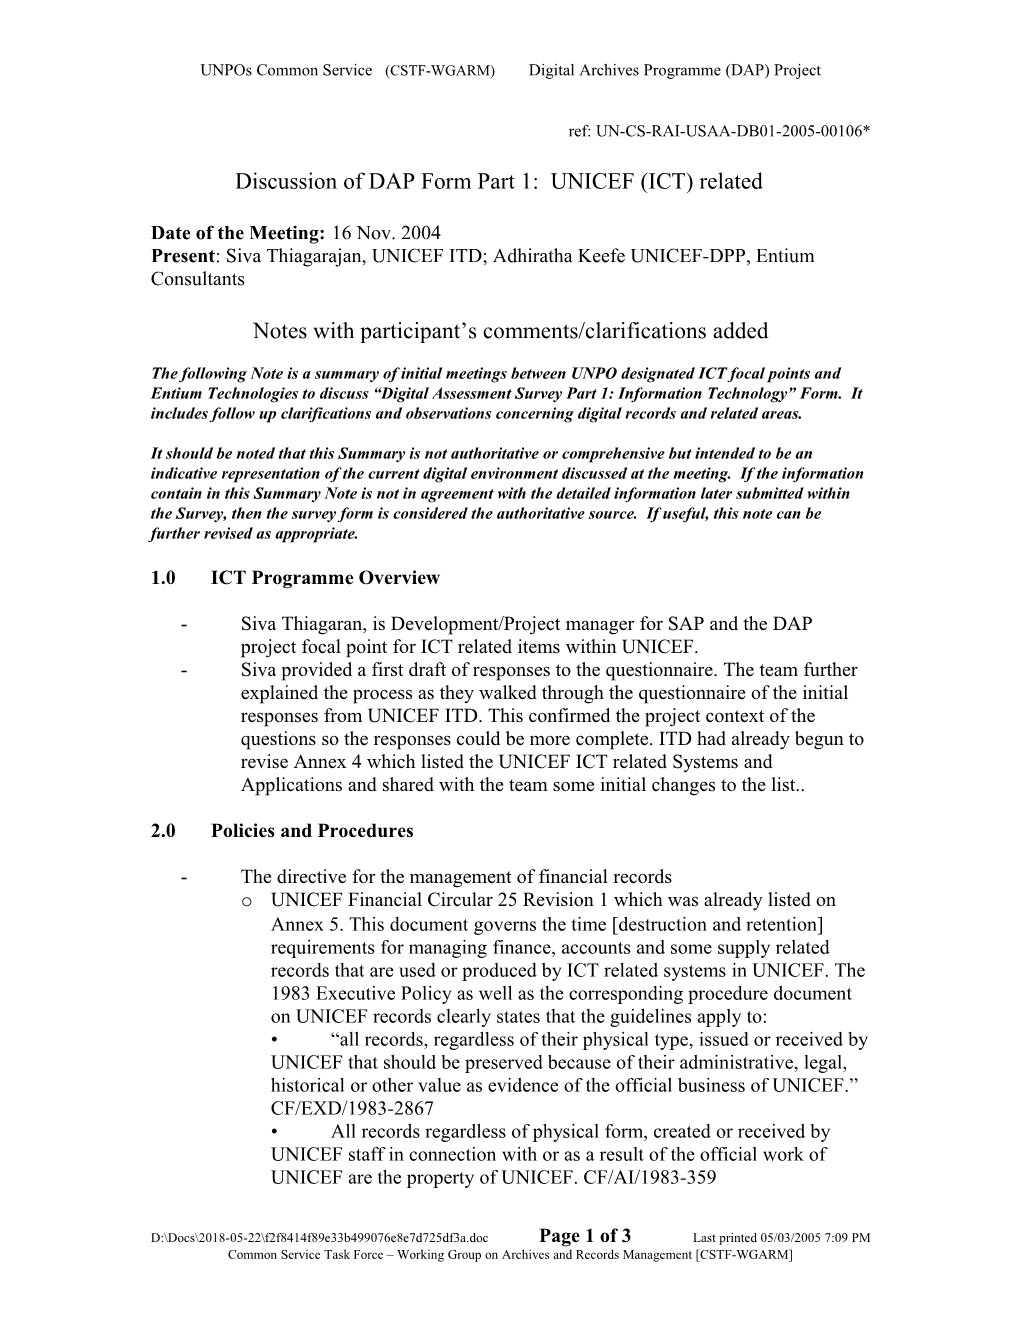 UNICEF: Summary of Meeting Notes for DAP